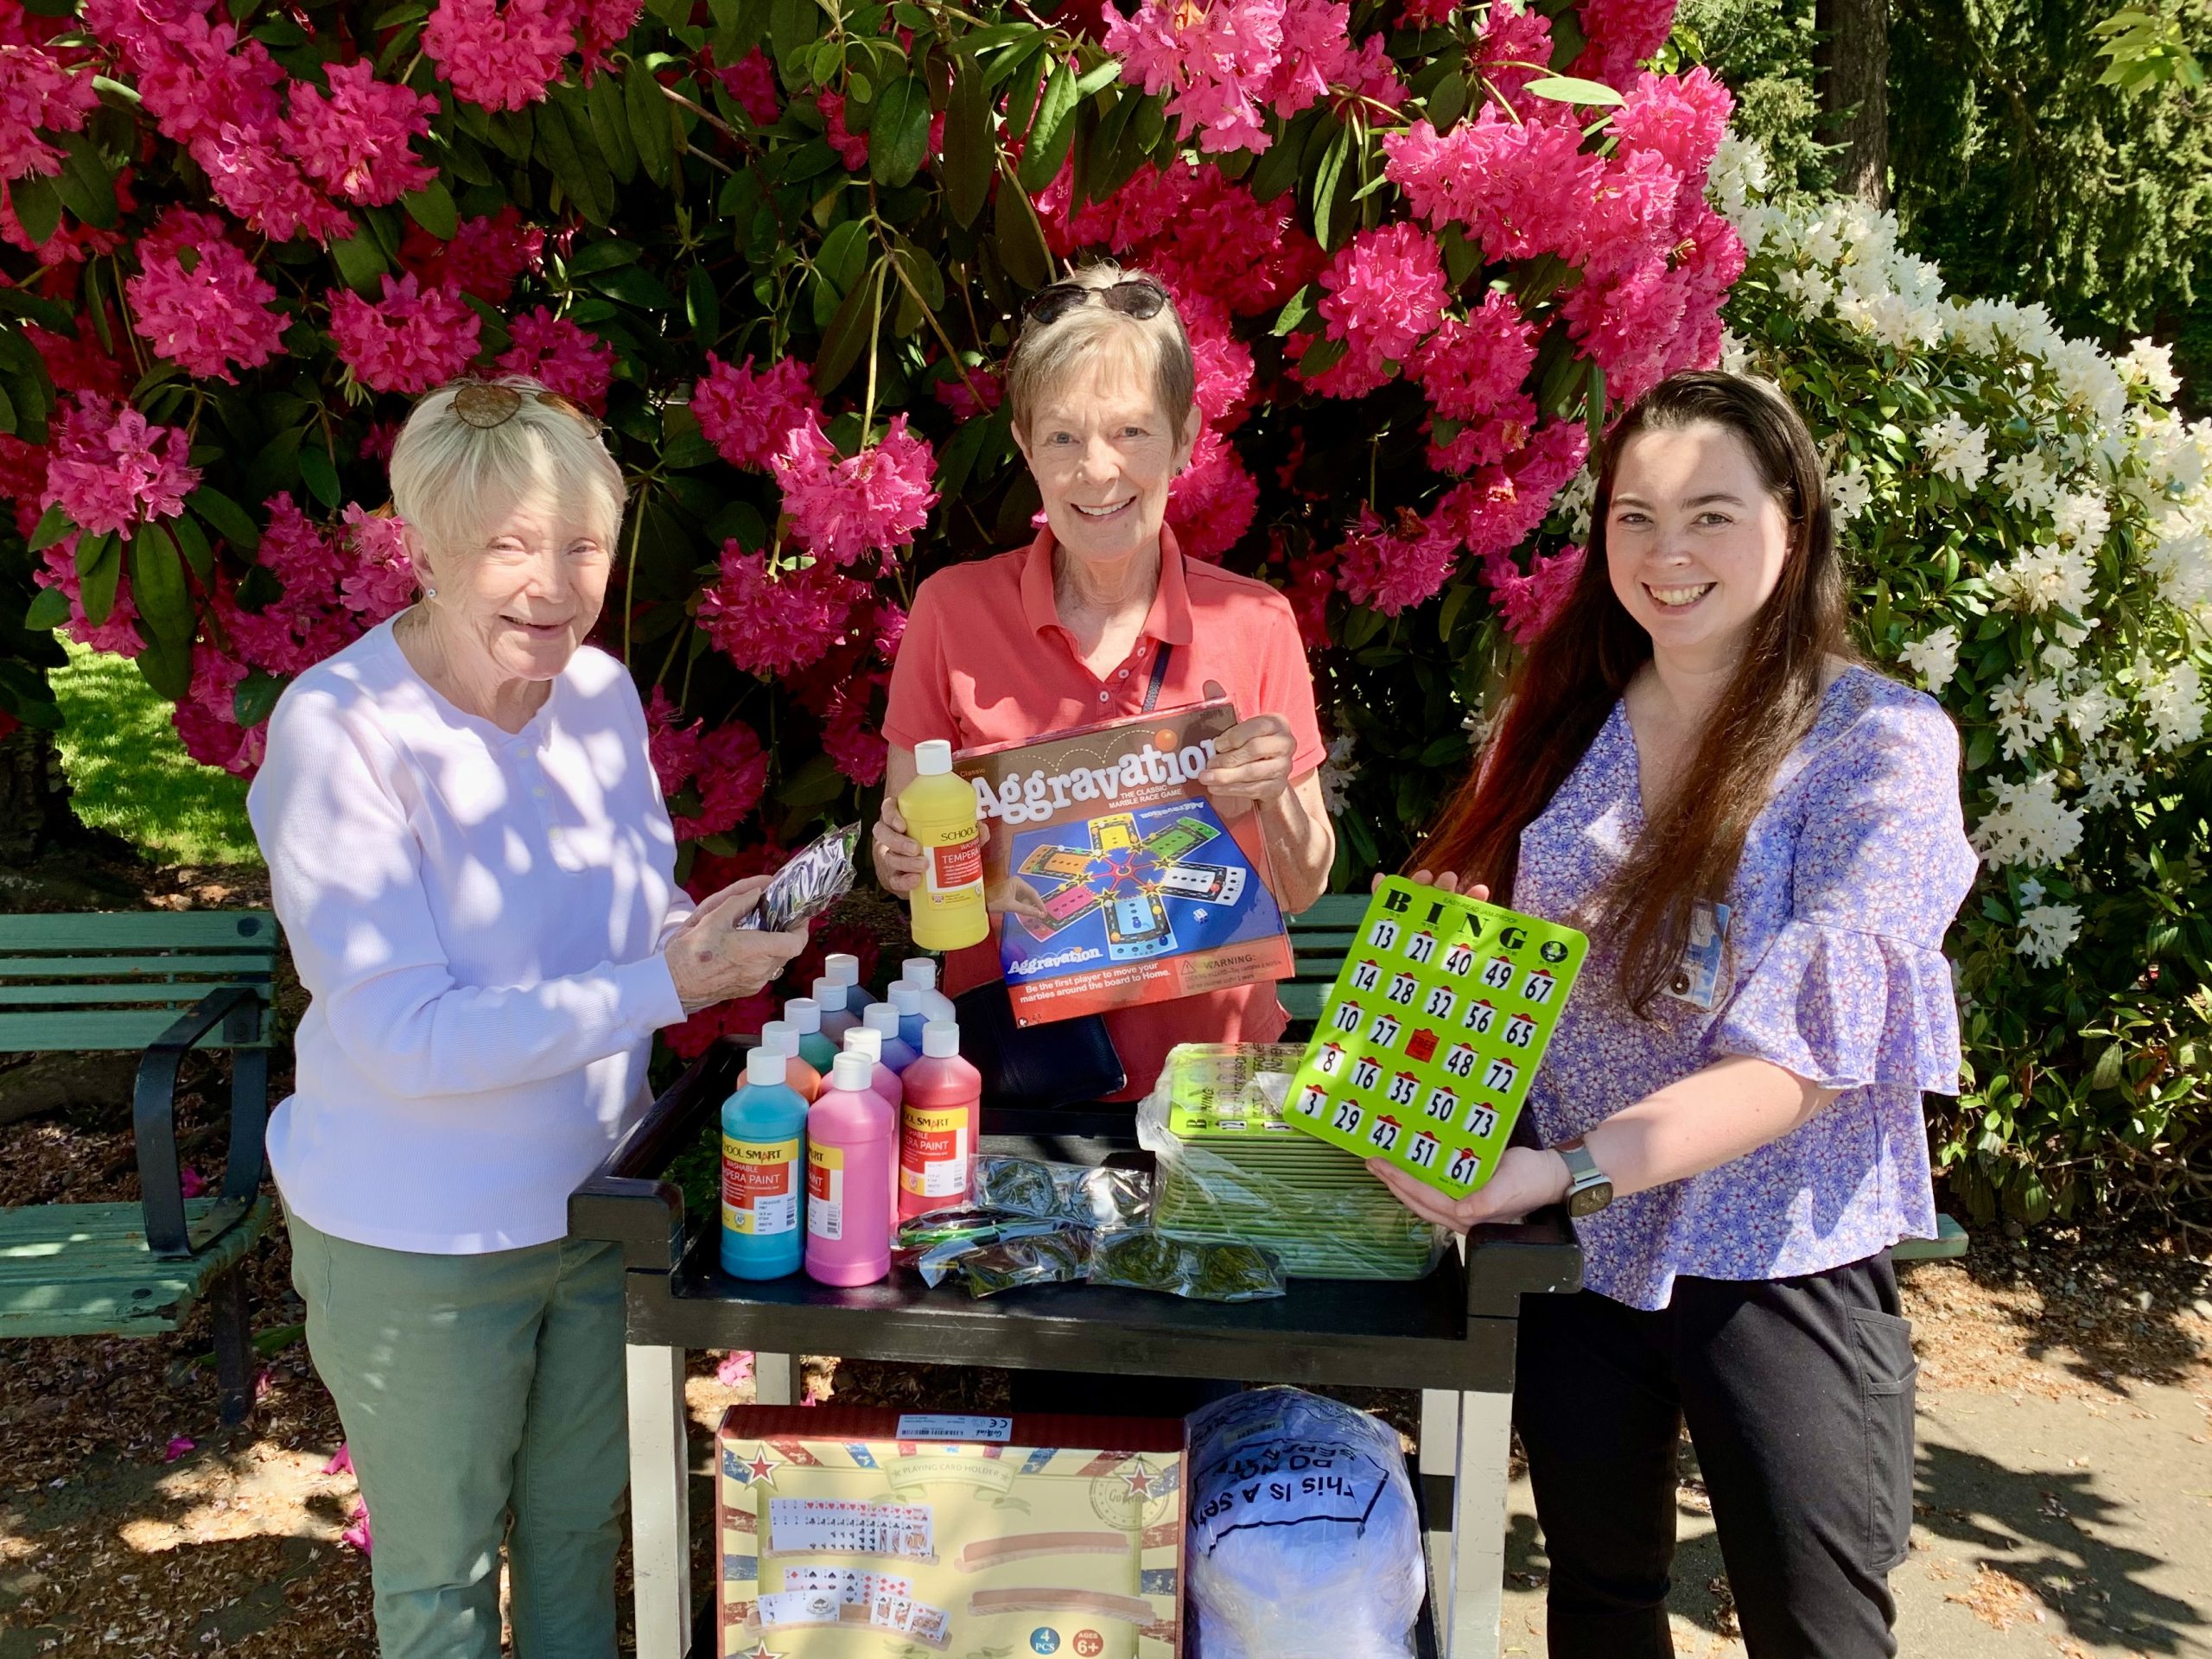 St. Francis Activity Director receives "Spring" gifts from member of the Care Center Support committee.